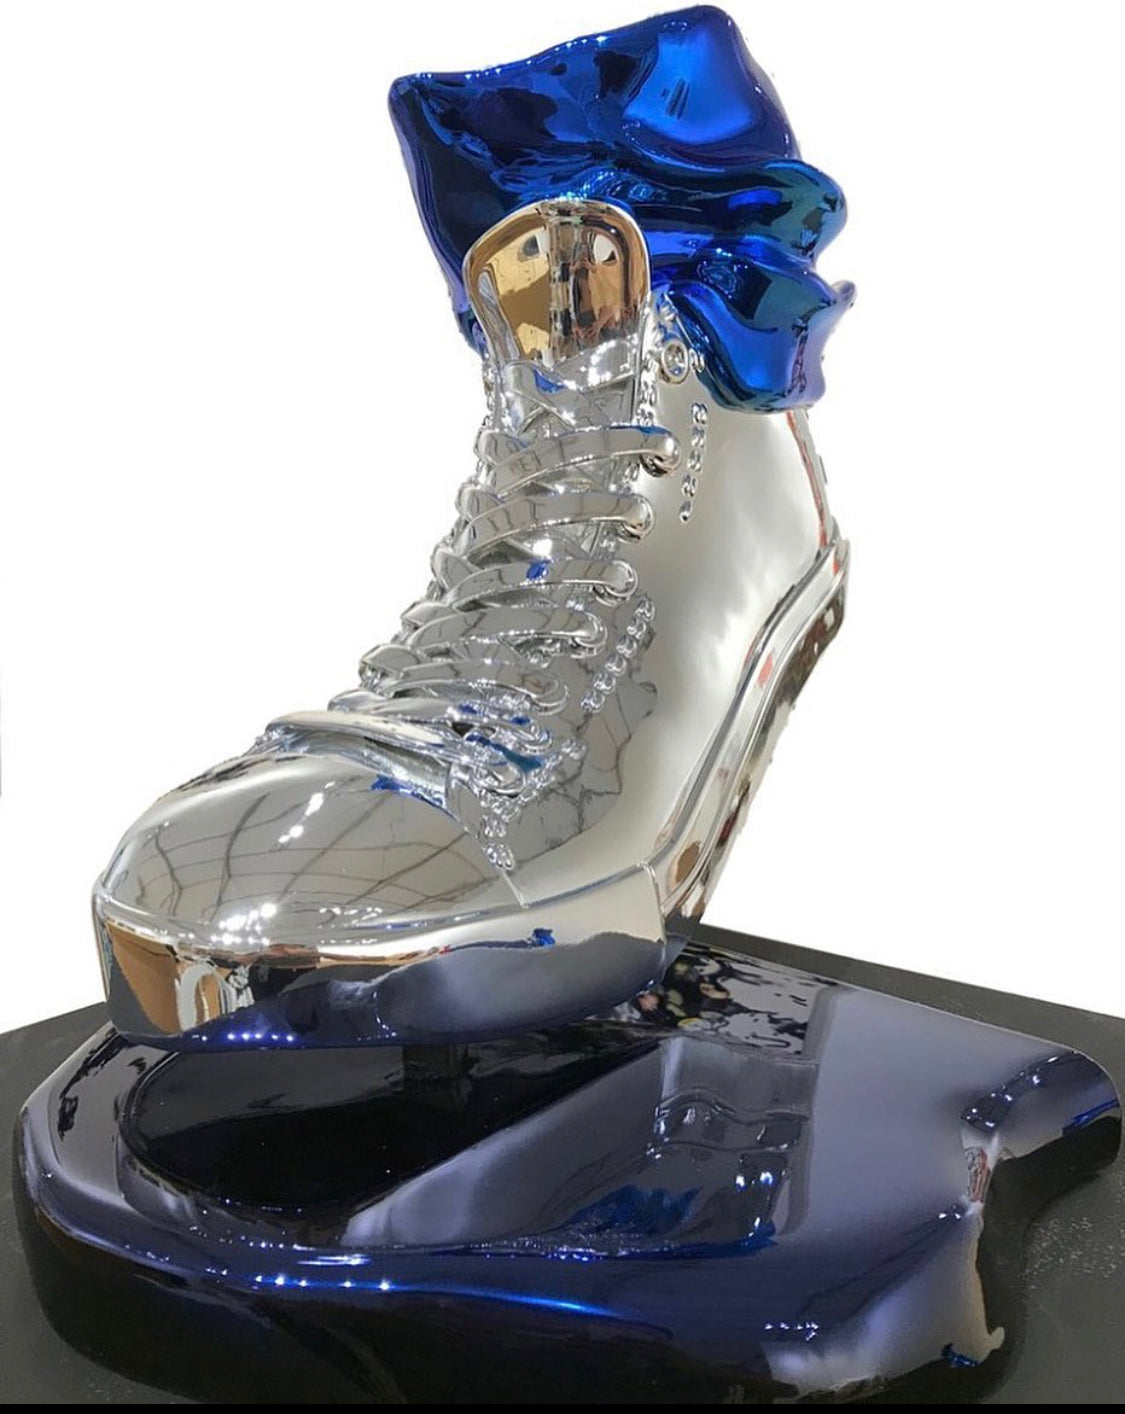 Shoe, 2018 Silver And Blue Sculpture